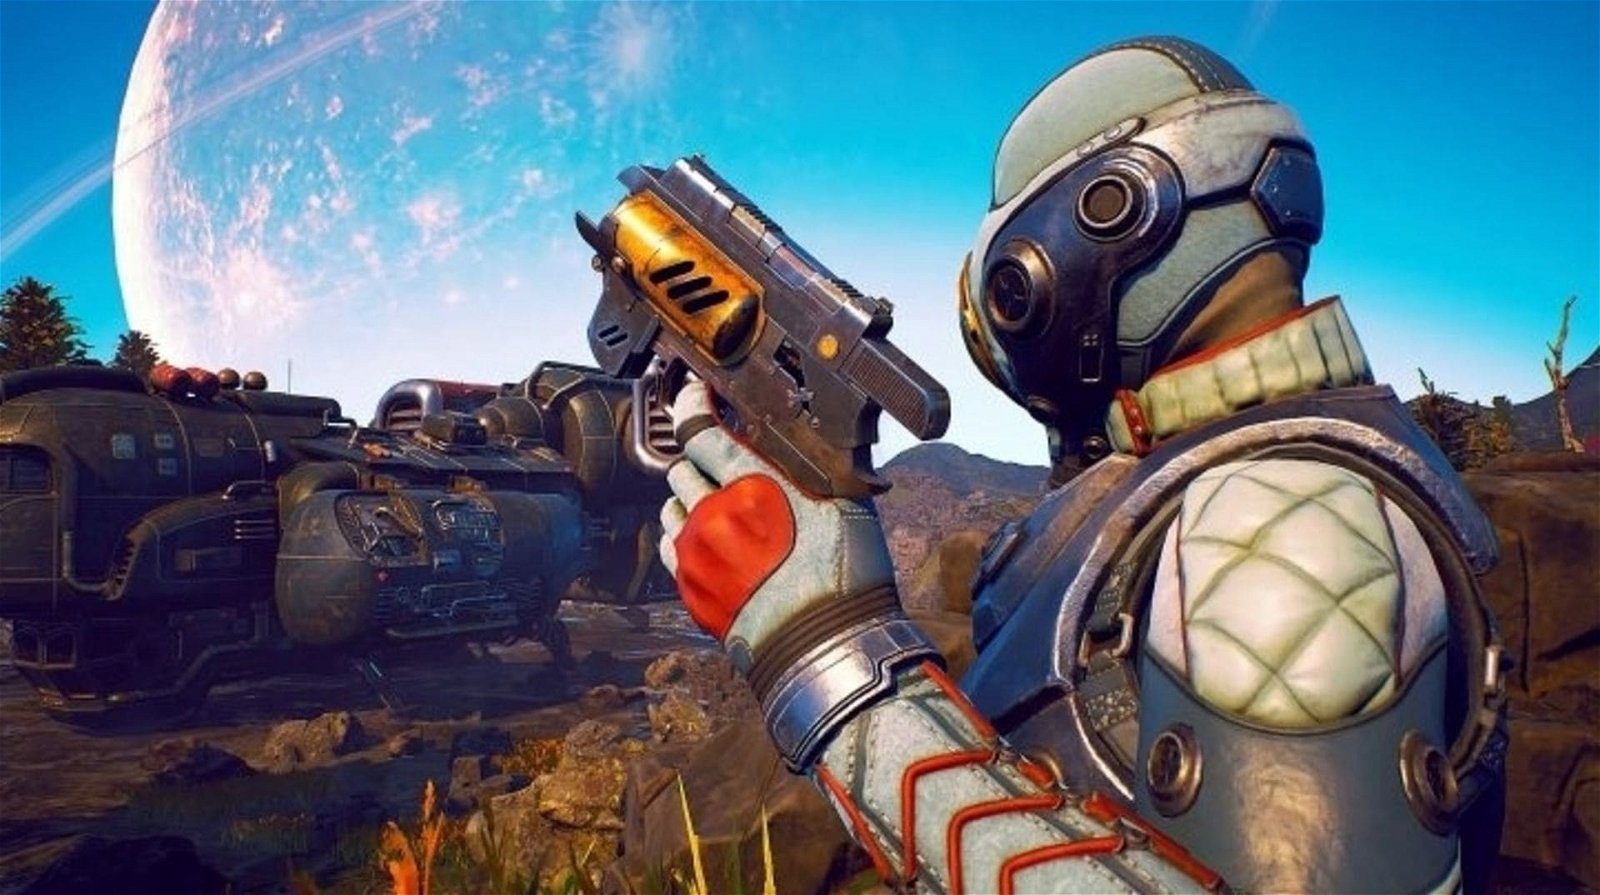 Exploring The Outer Worlds: An Interview with Senior Narrative Designer Megan Starks. 1